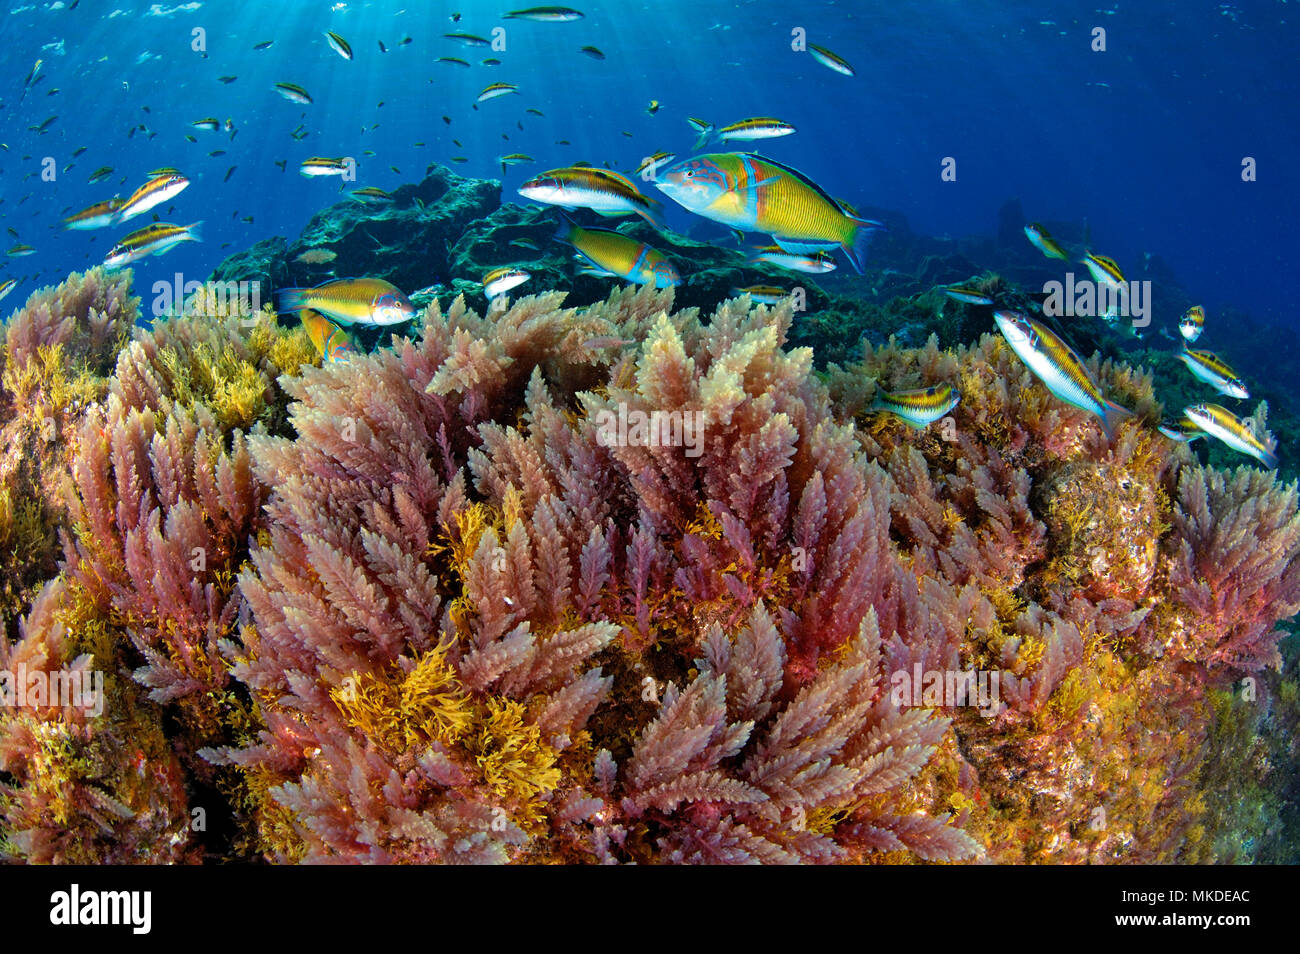 Red algae (Asparagopsis taxiformis) and Ornate wrasse. Tenerife, Canary Islands. Stock Photo